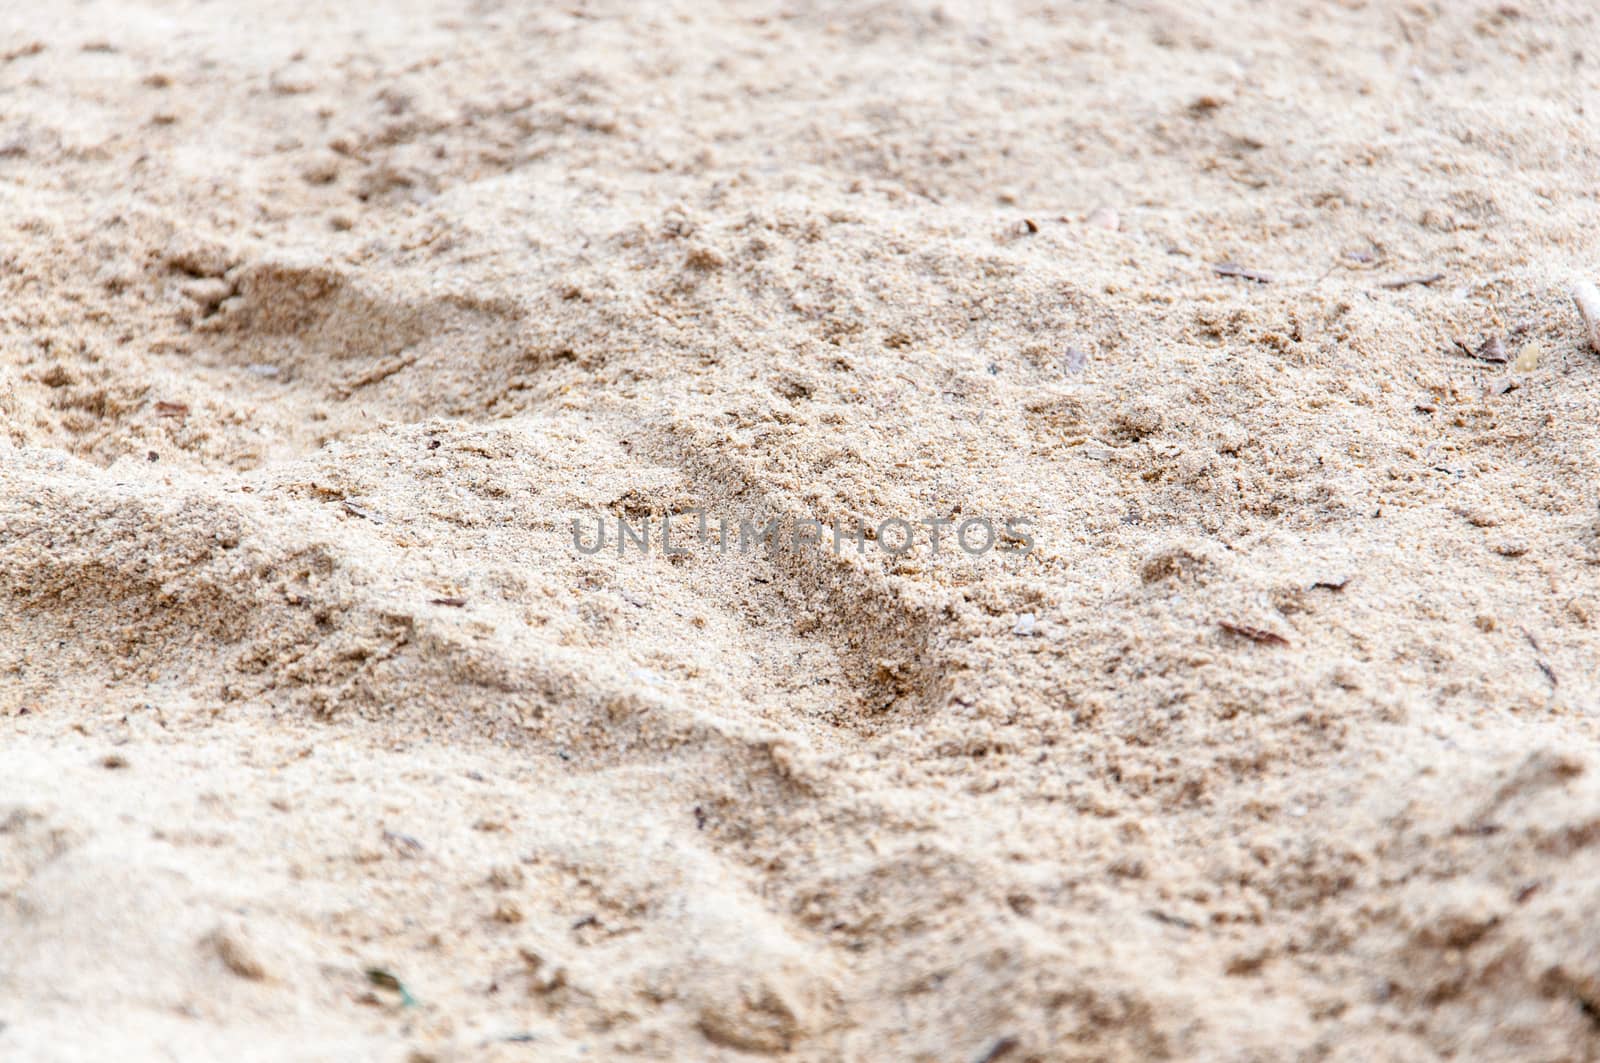 Raindrops in hot sand closeup. by ArtesiaWells